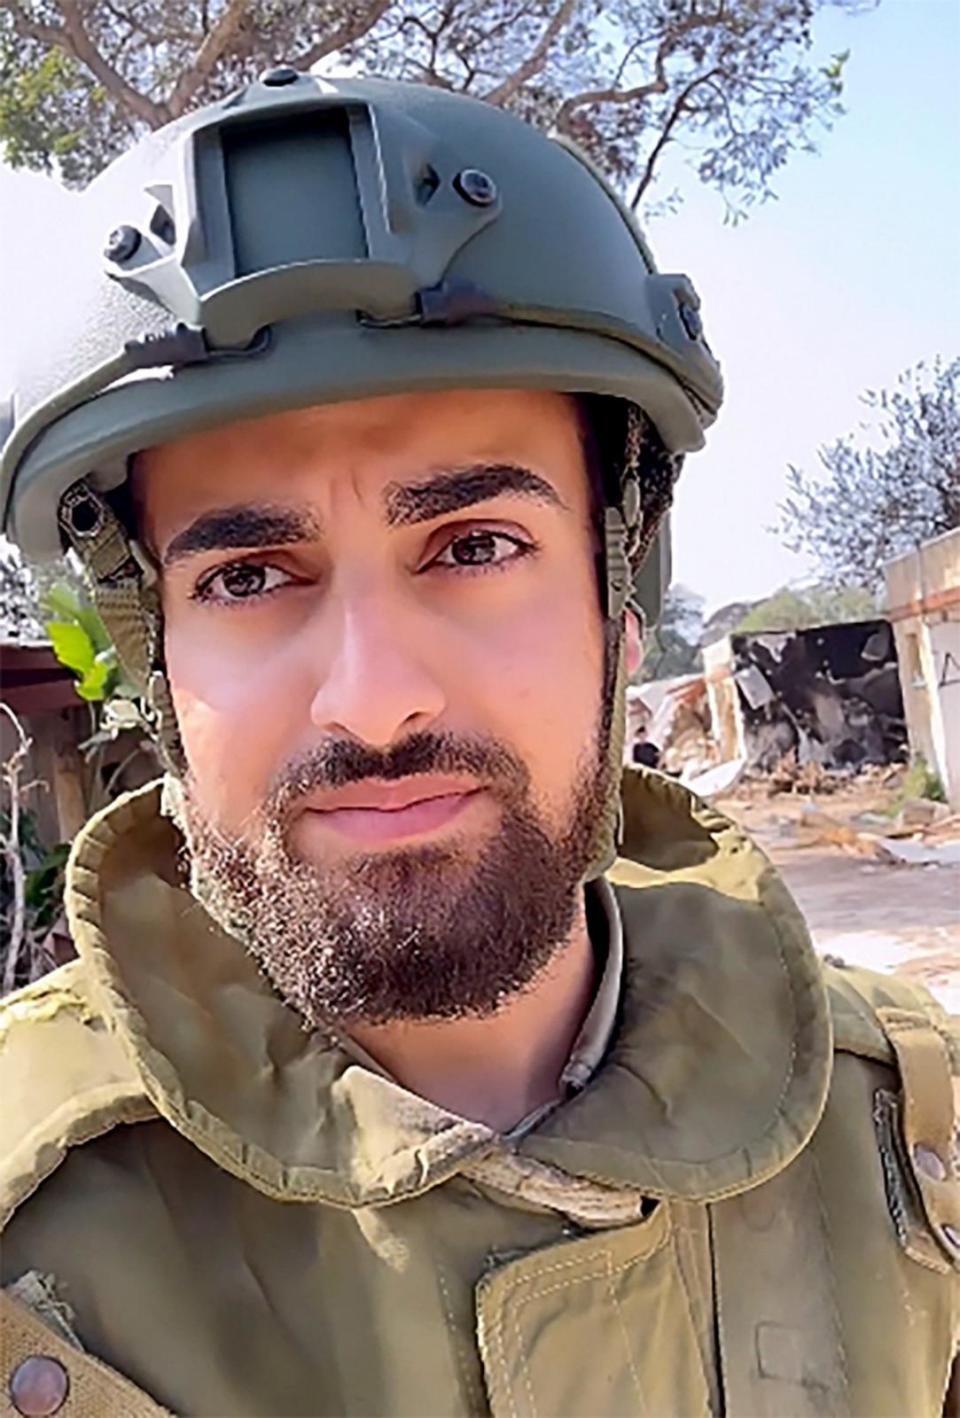 PHOTO: Adiel Cohen, 25, pictured in this undated photo is a pro-Israel social media influencer and content creator who is also a soldier for the Israel Defense Forces on the front lines in northern Israel. (@adielofisrael/Instagram)